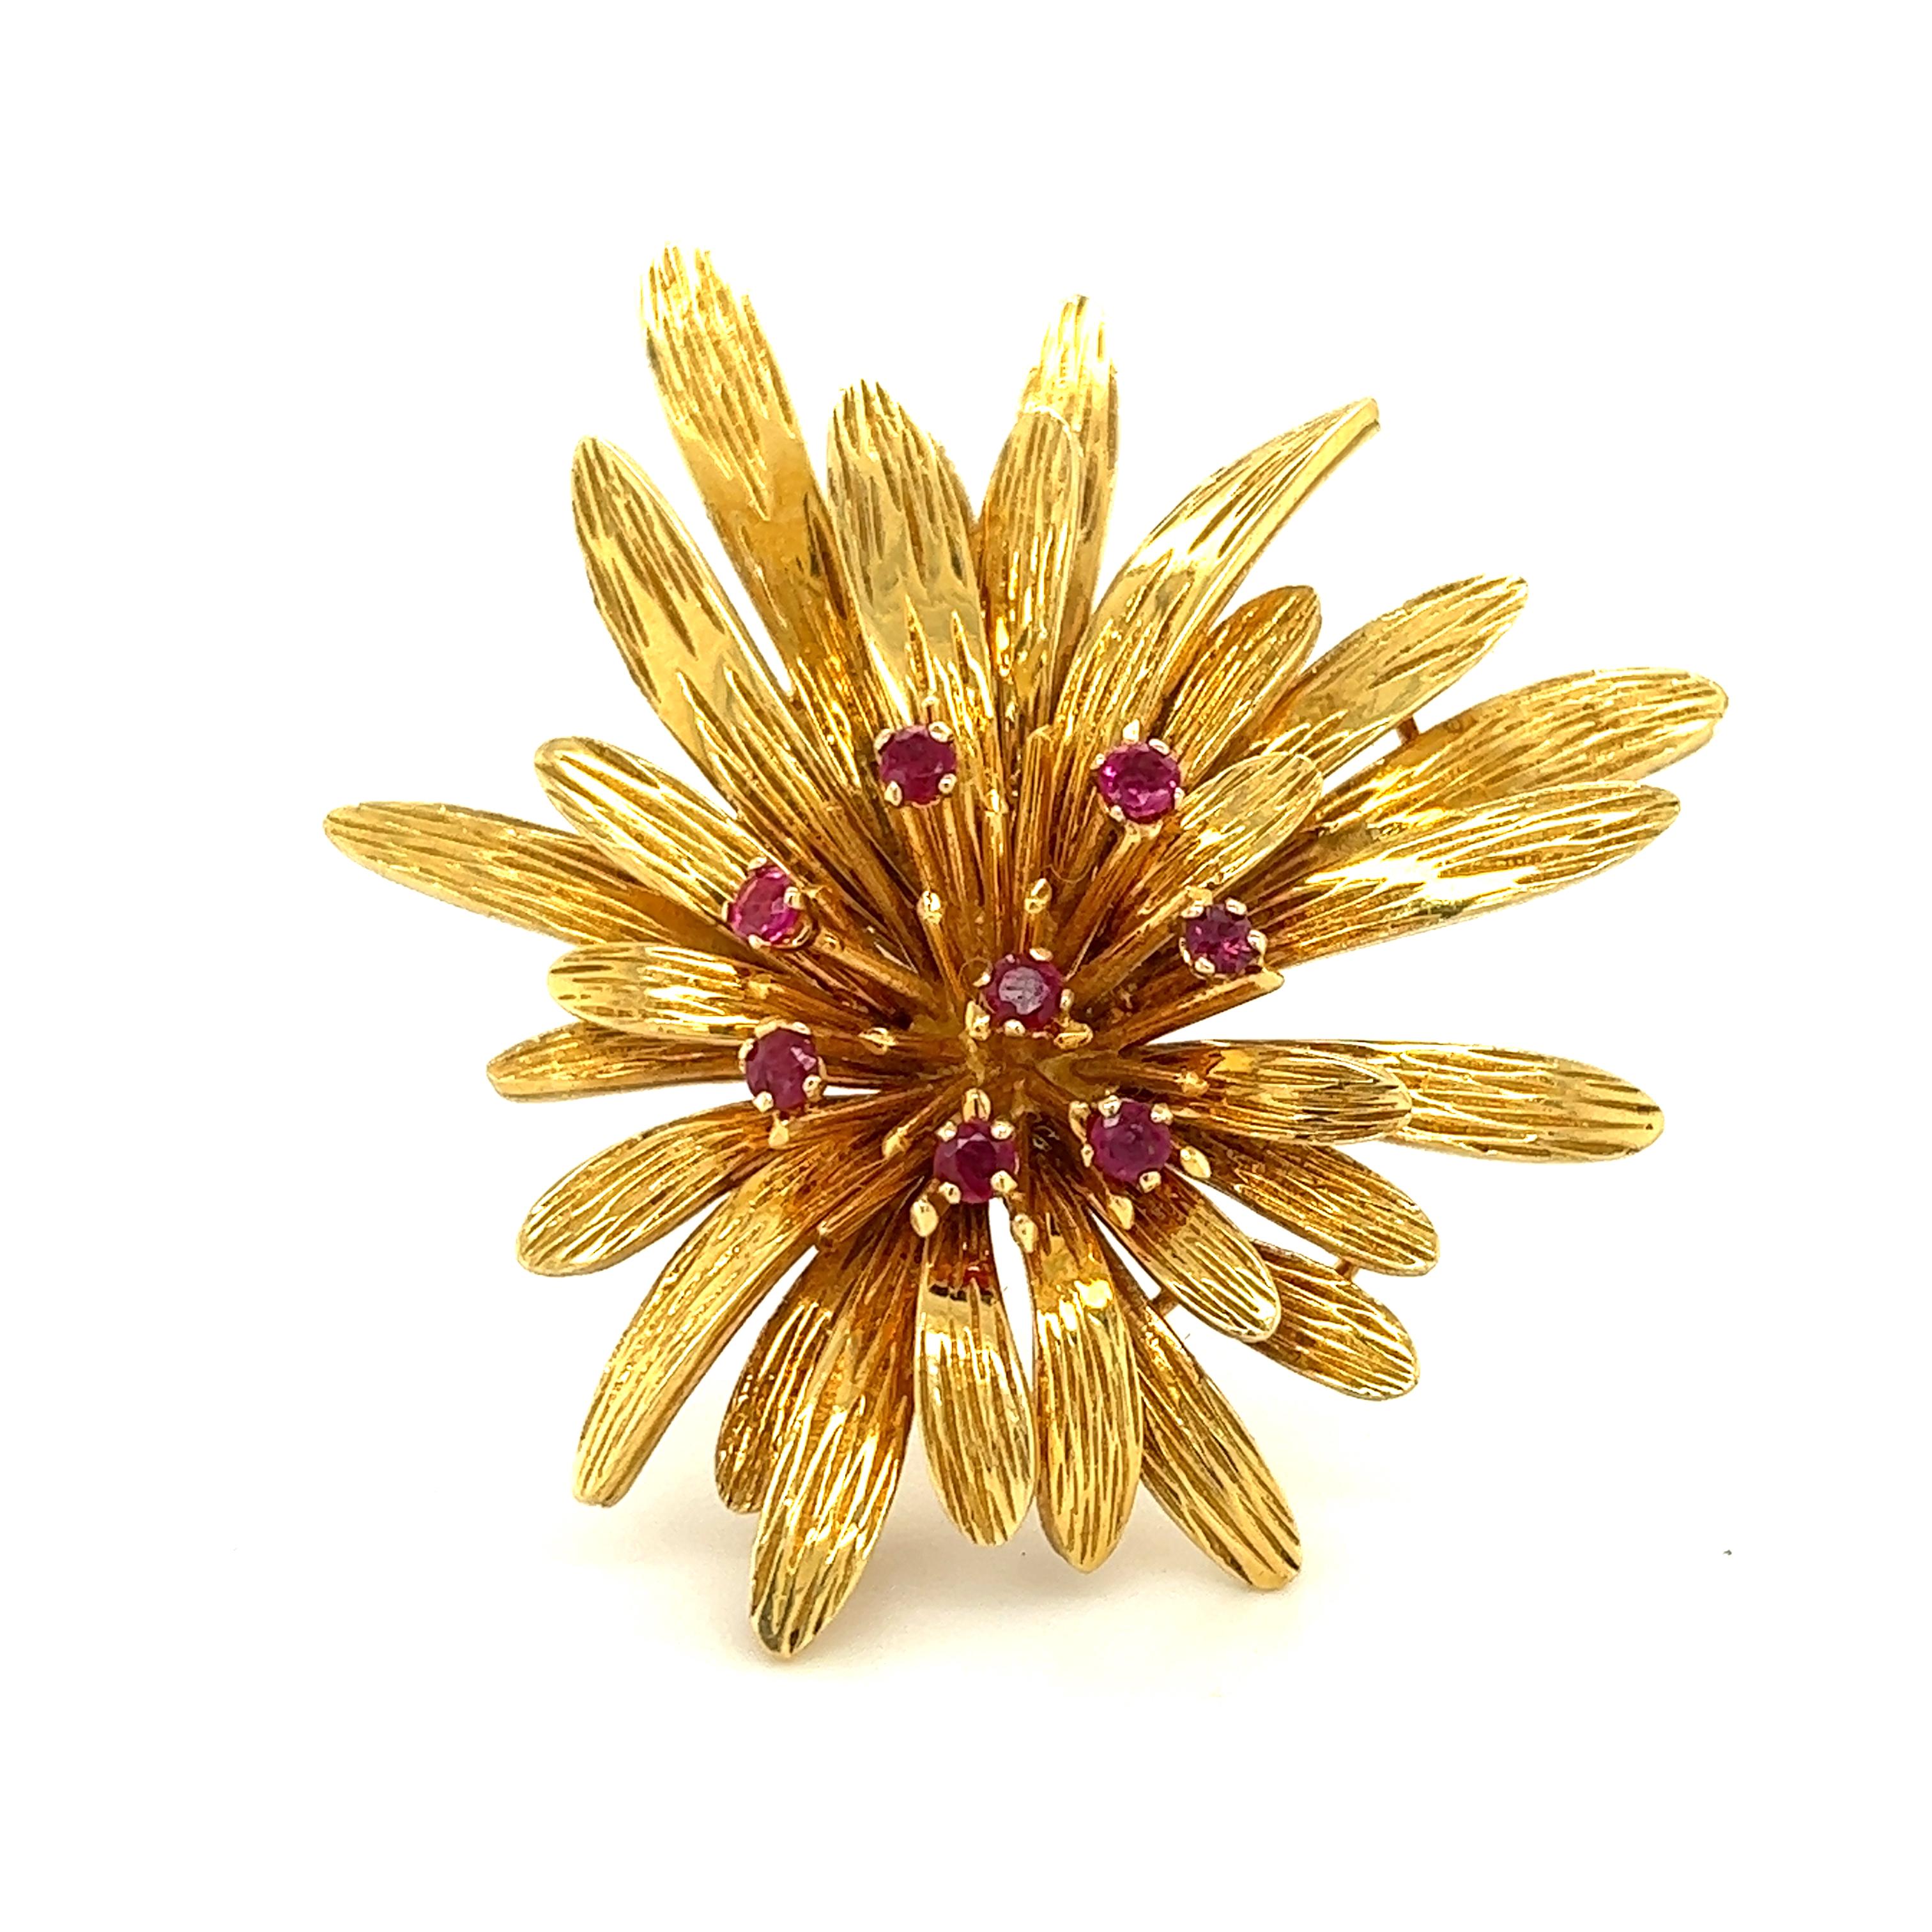    One beautiful brooch crafted by famed designer Van Cleef & Arpels. The brooch is crafted to depict a large flower as details are seen throughout. The brooch shows multiple layers of yellow gold, with fine etched details at every angle. The brooch